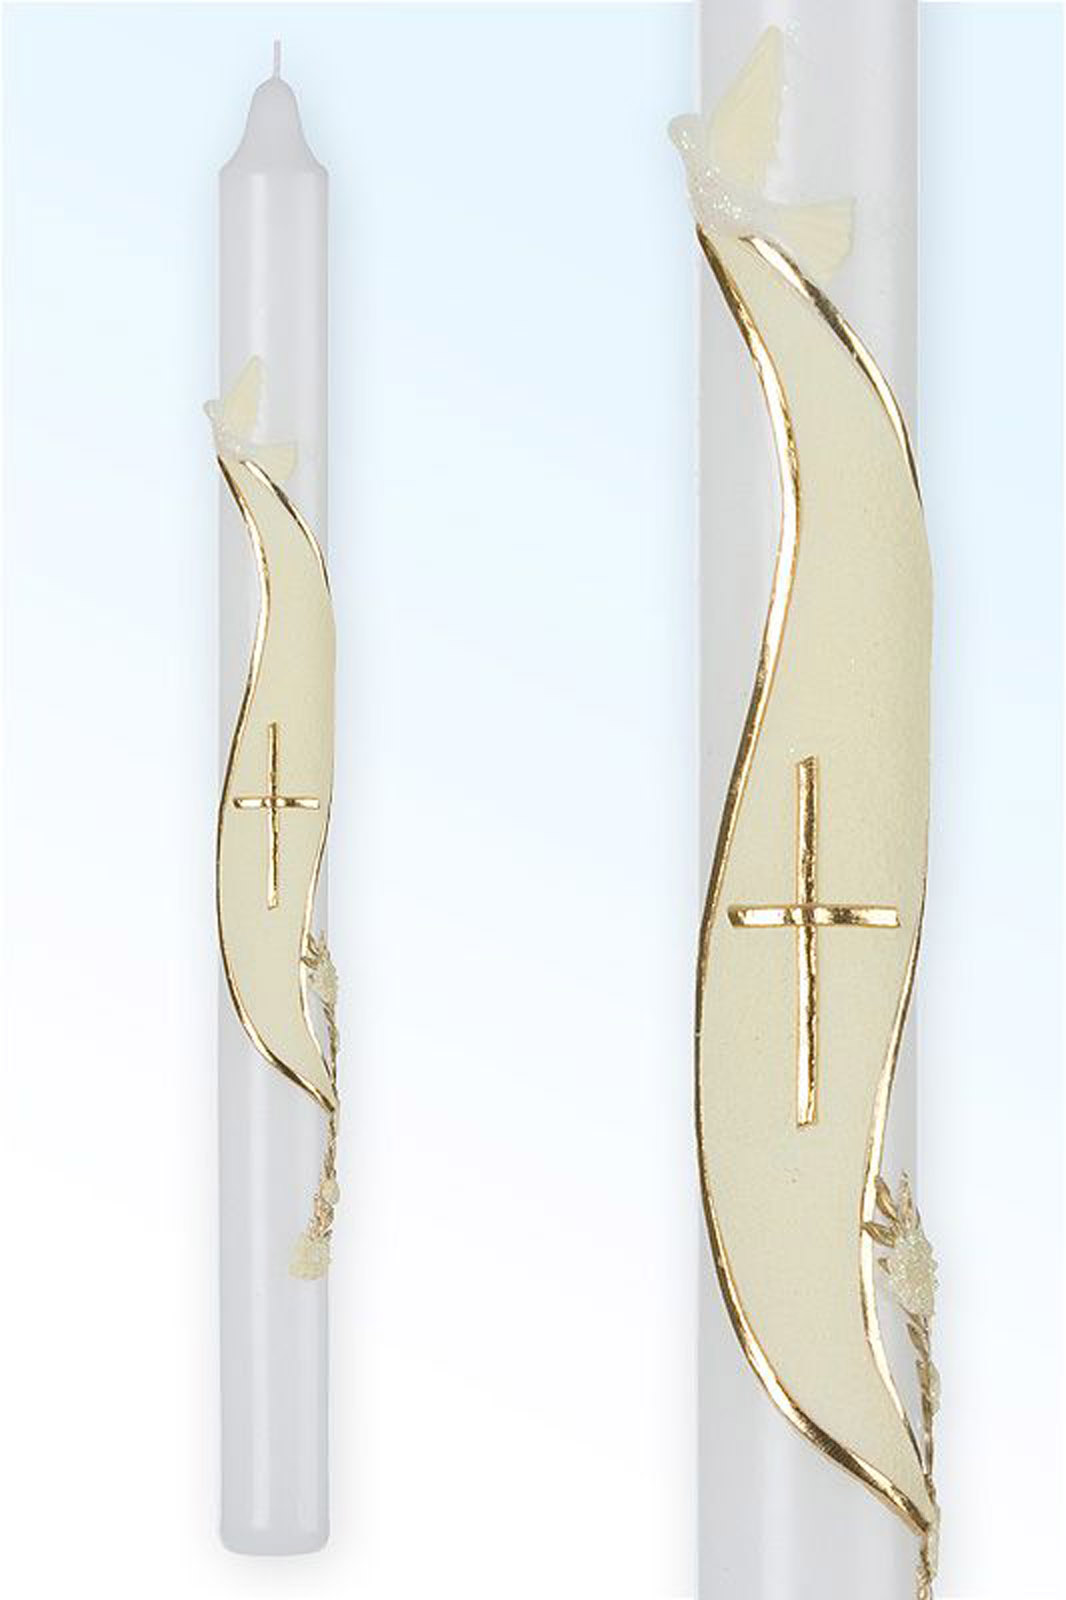 Two Baptism candles with cross on the cream background and the dove flying over